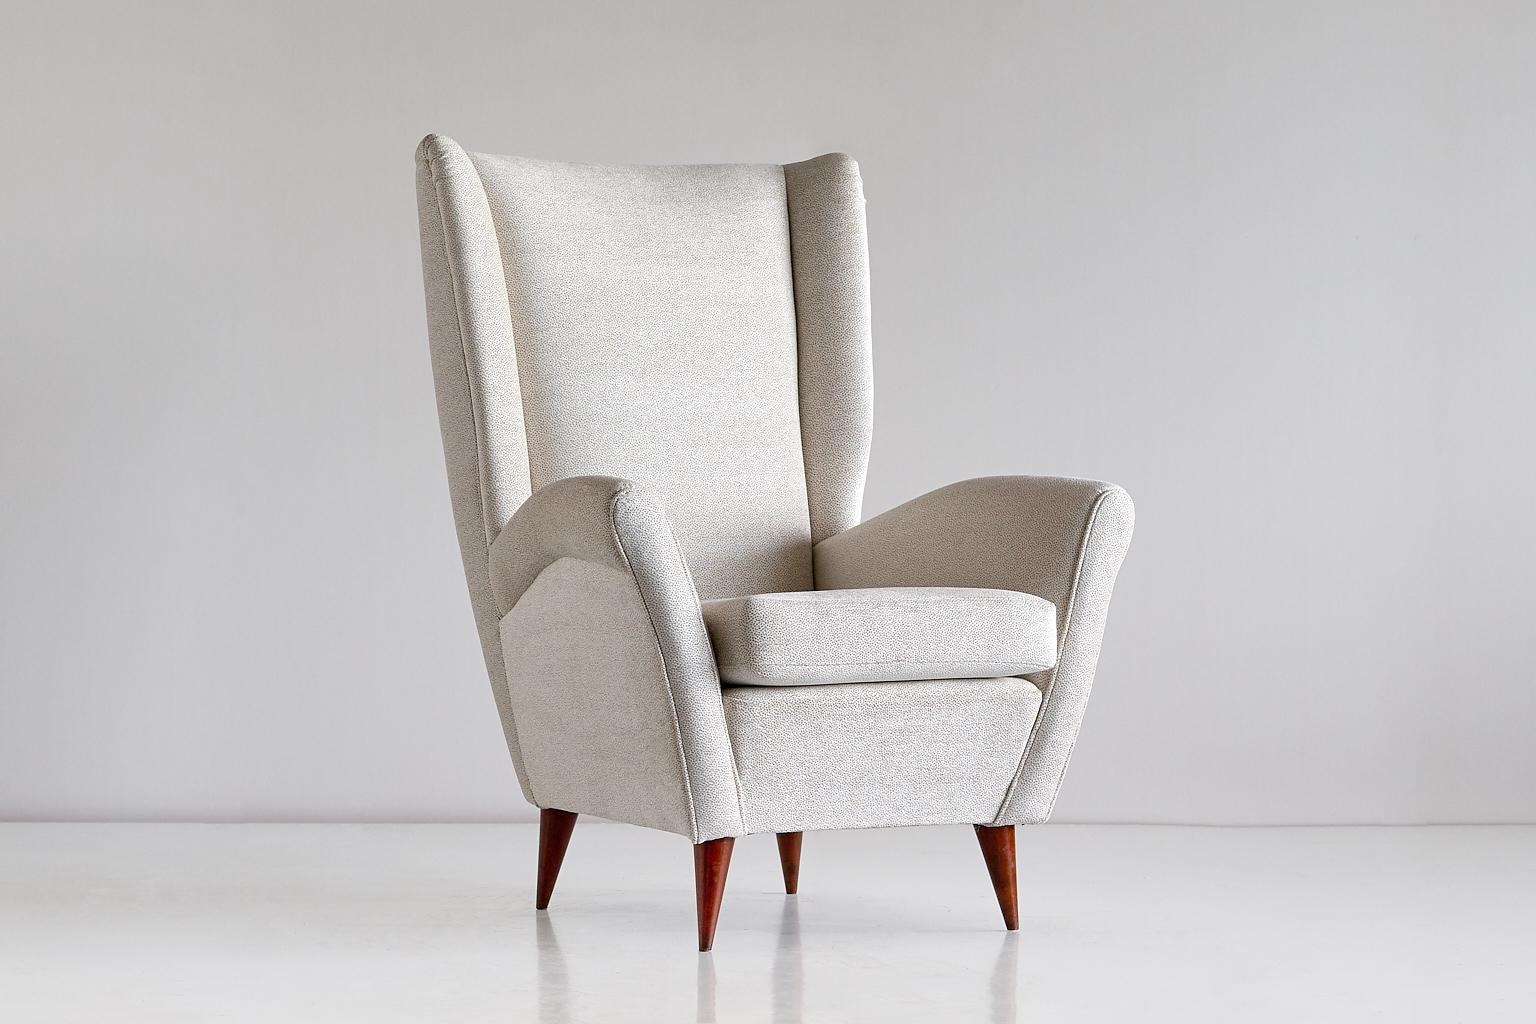 Italian Gio Ponti High Back Armchair in Ivory Chenille and Walnut, Italy, Late 1940s